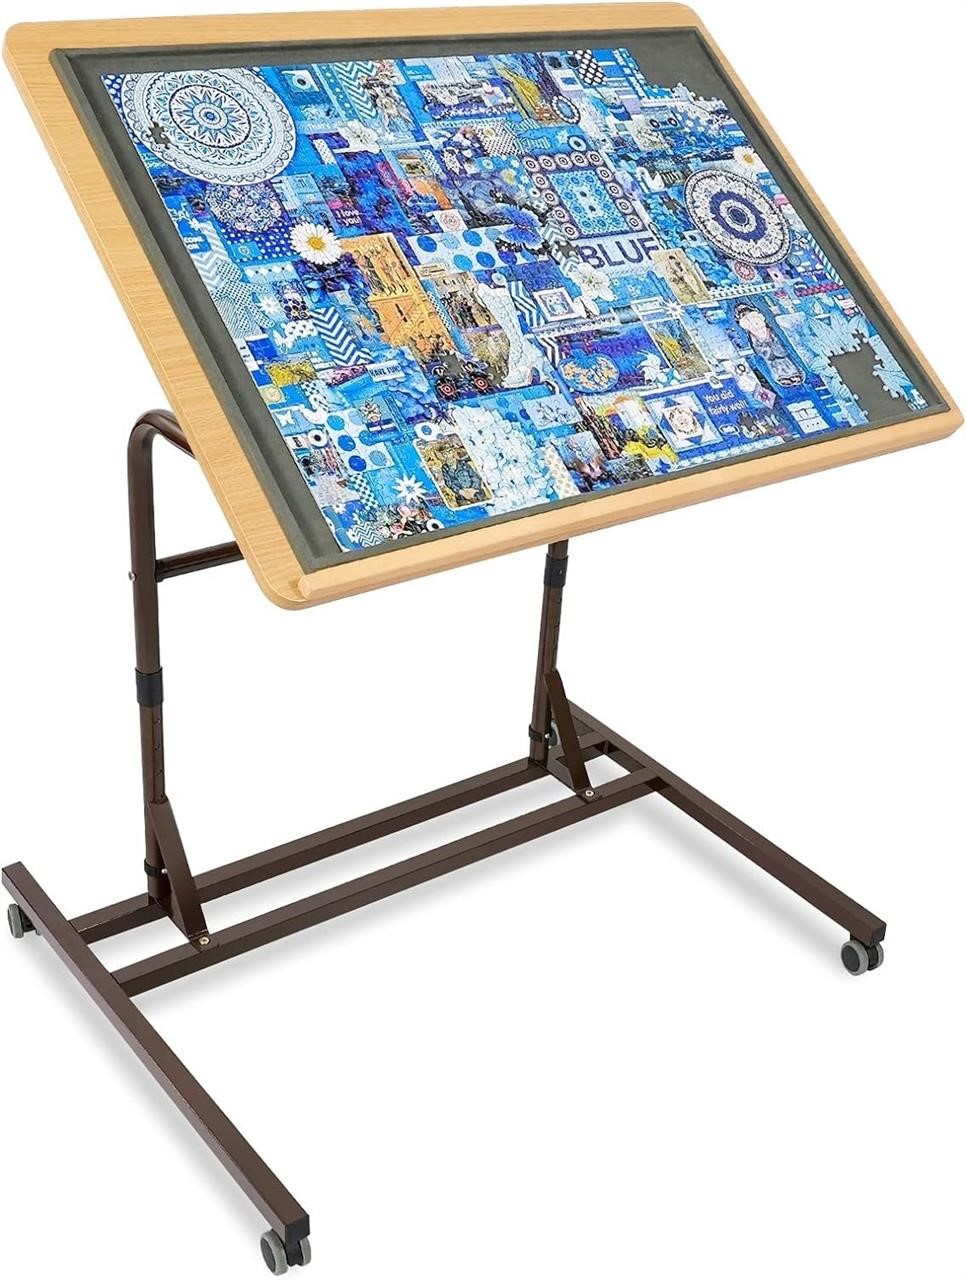 Adjustable Wooden Jigsaw Puzzle Table with Wheels